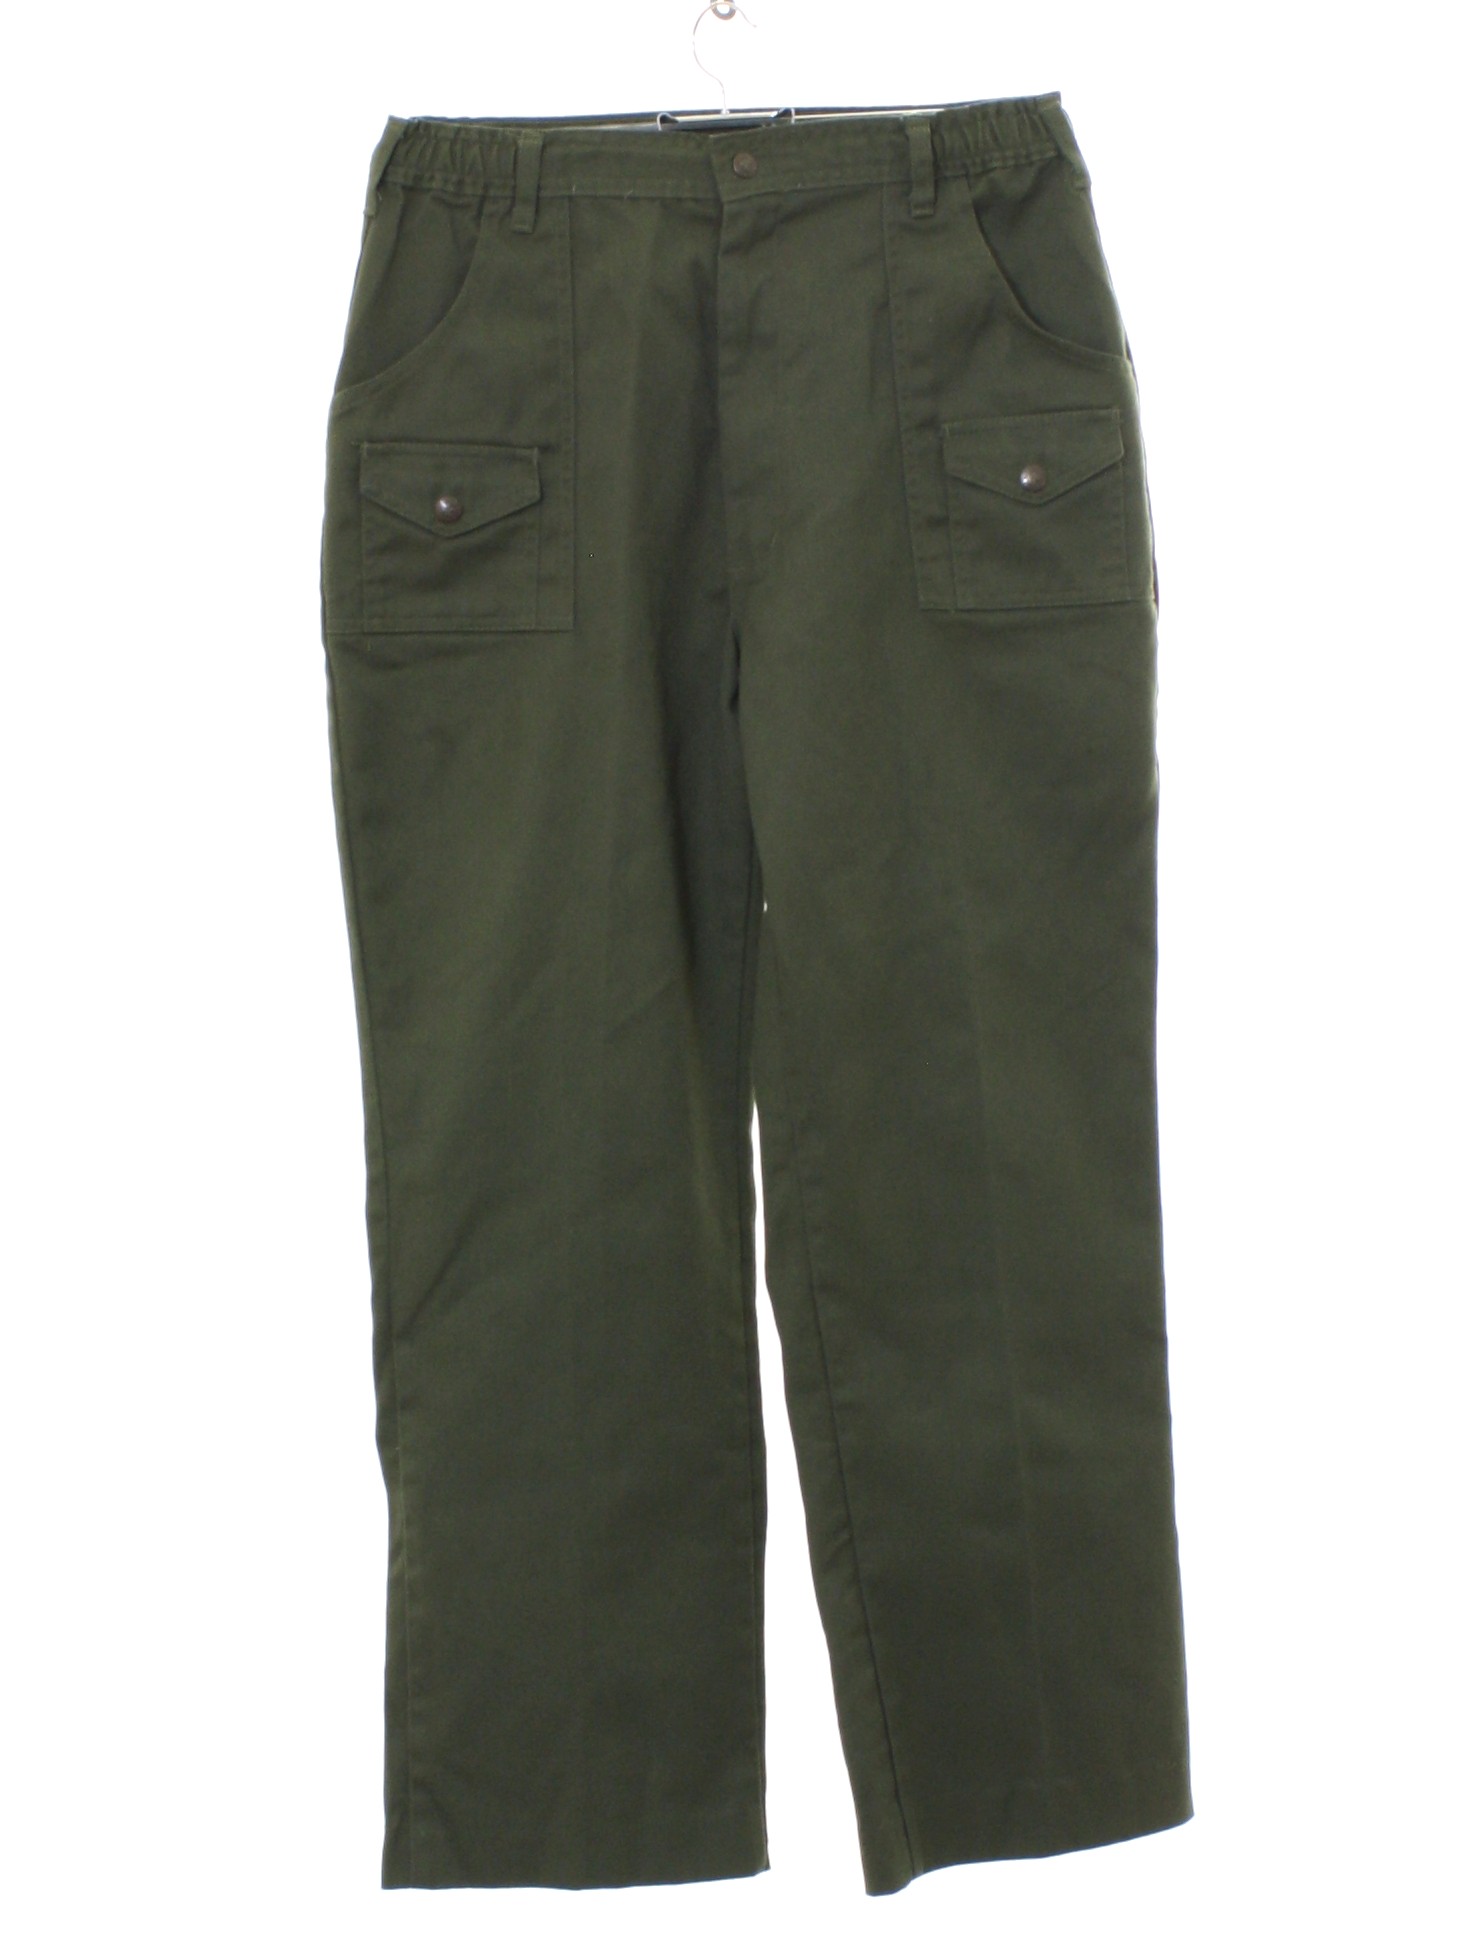 60s Retro Pants: 60s -Boy Scouts of America- Mens olive drab background ...